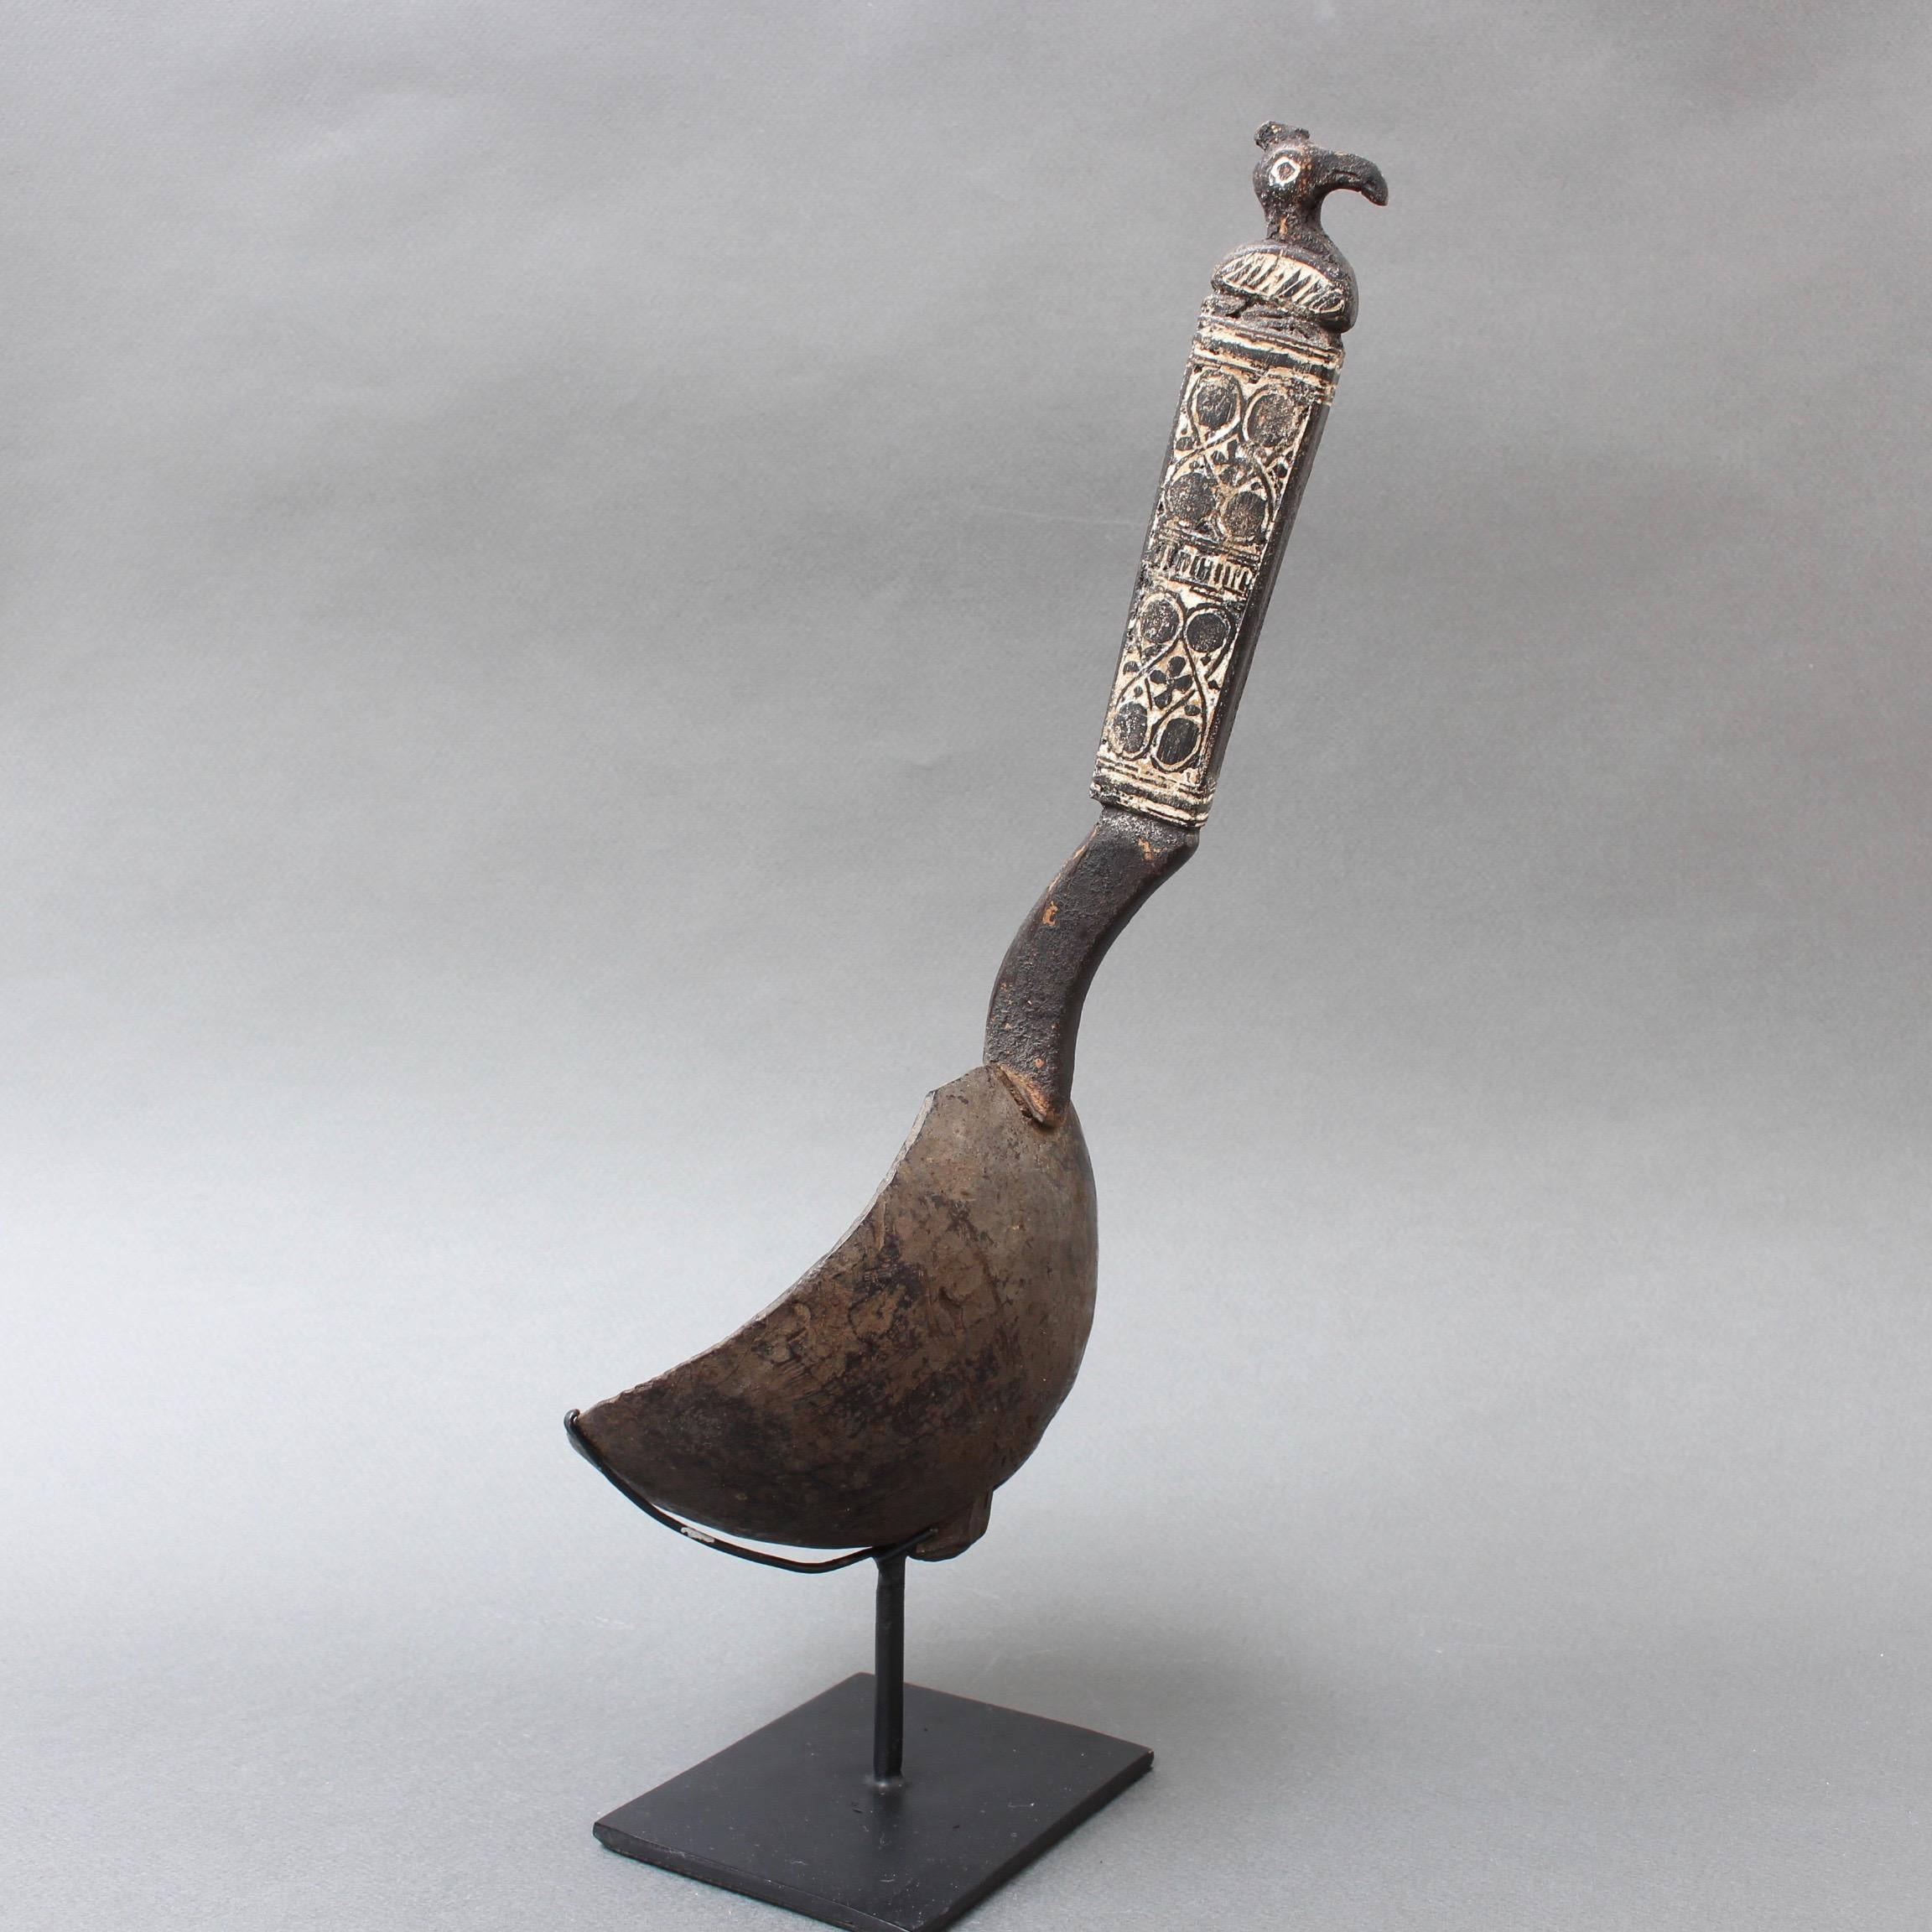 Ritual Ladle of Wood and Coconut Shell from Timor Island, Indonesia, circa 1950s For Sale 1